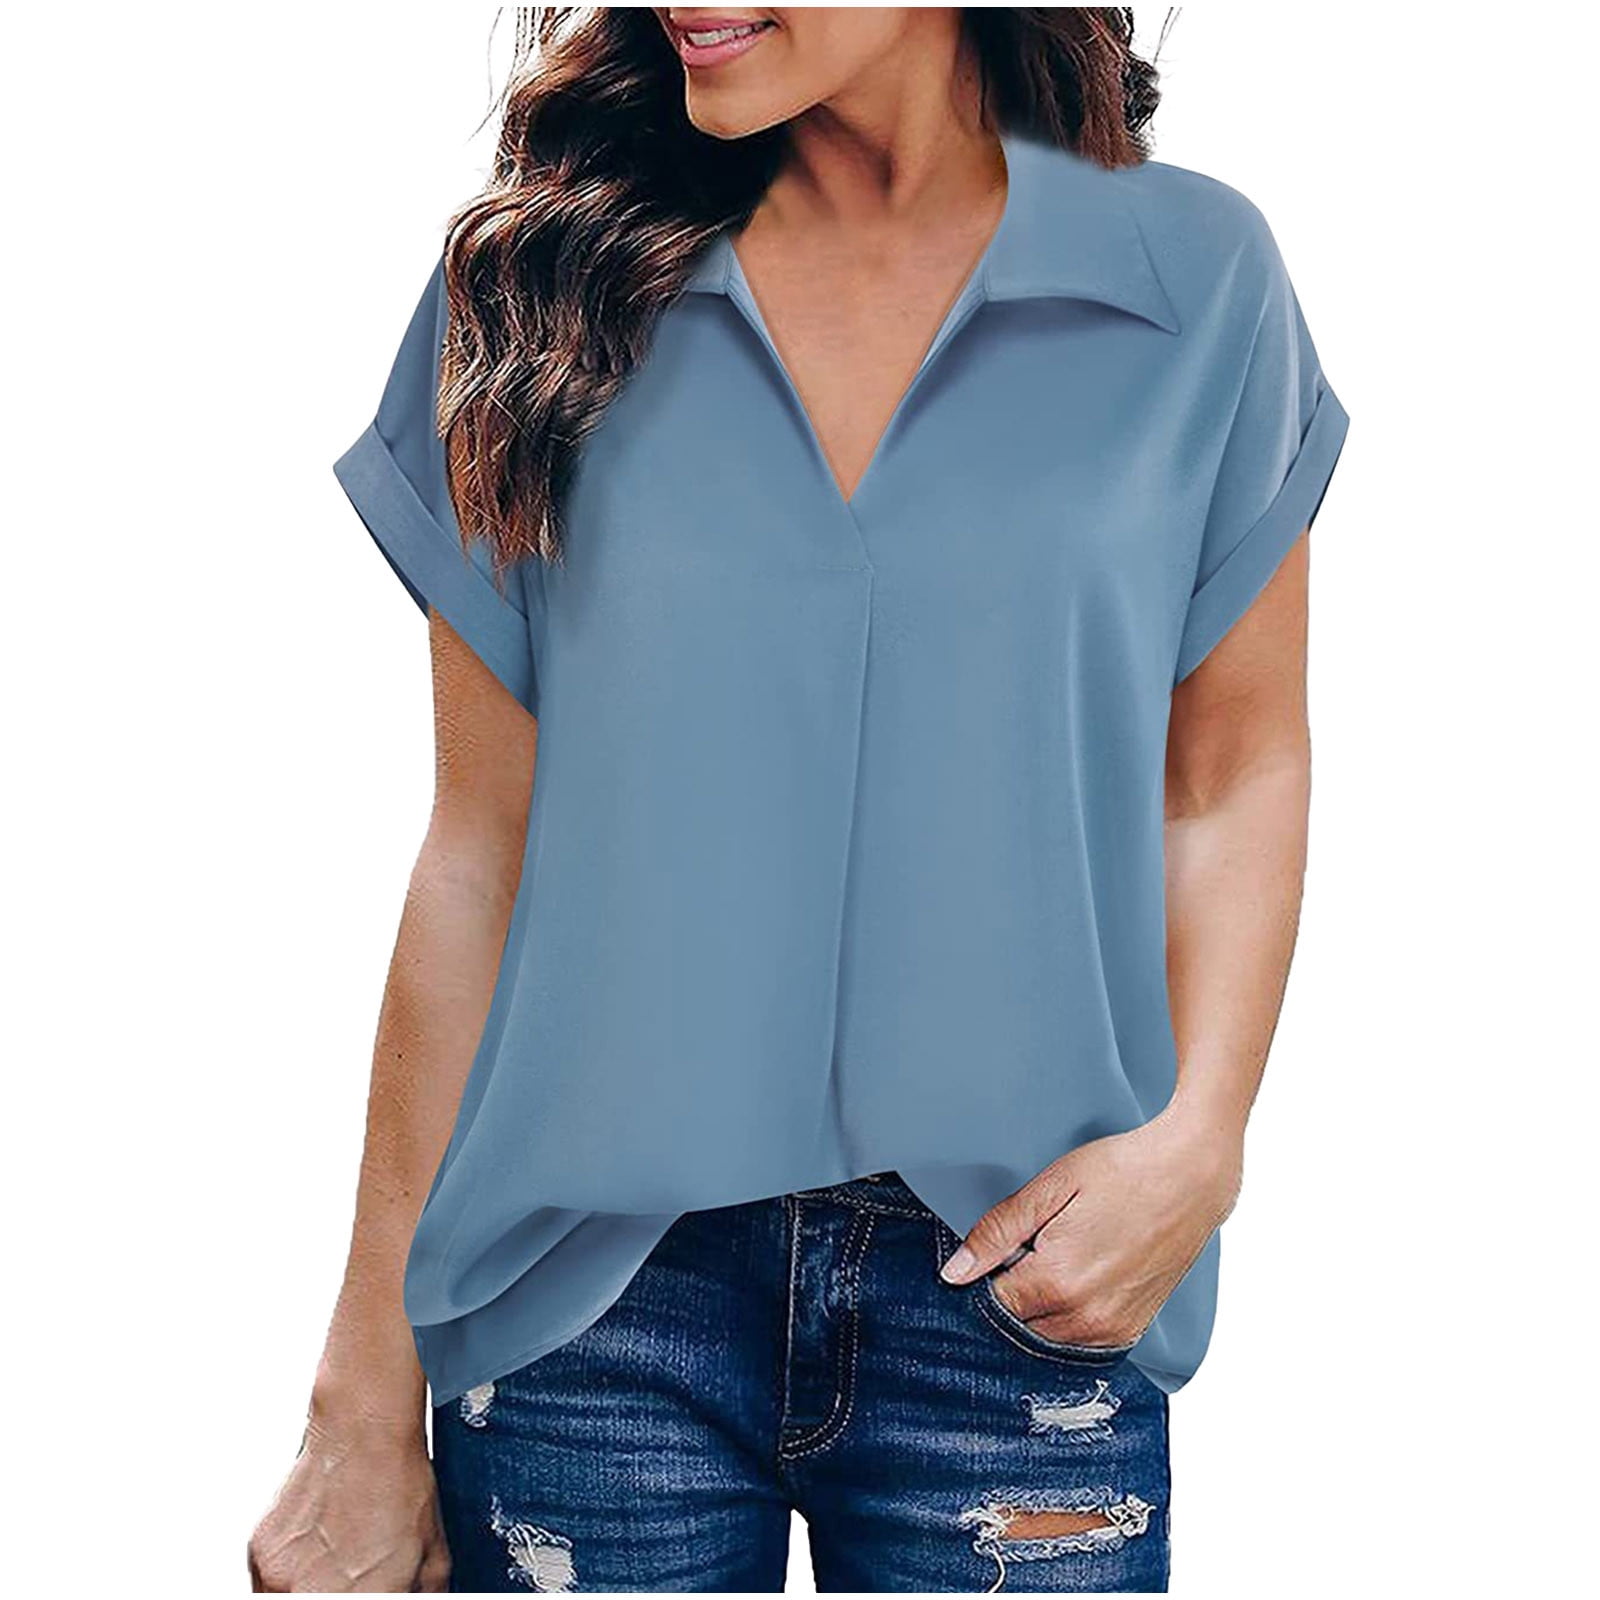 Dressy Tops for Women Business Casual Vintage Plain Color Short Sleeve ...